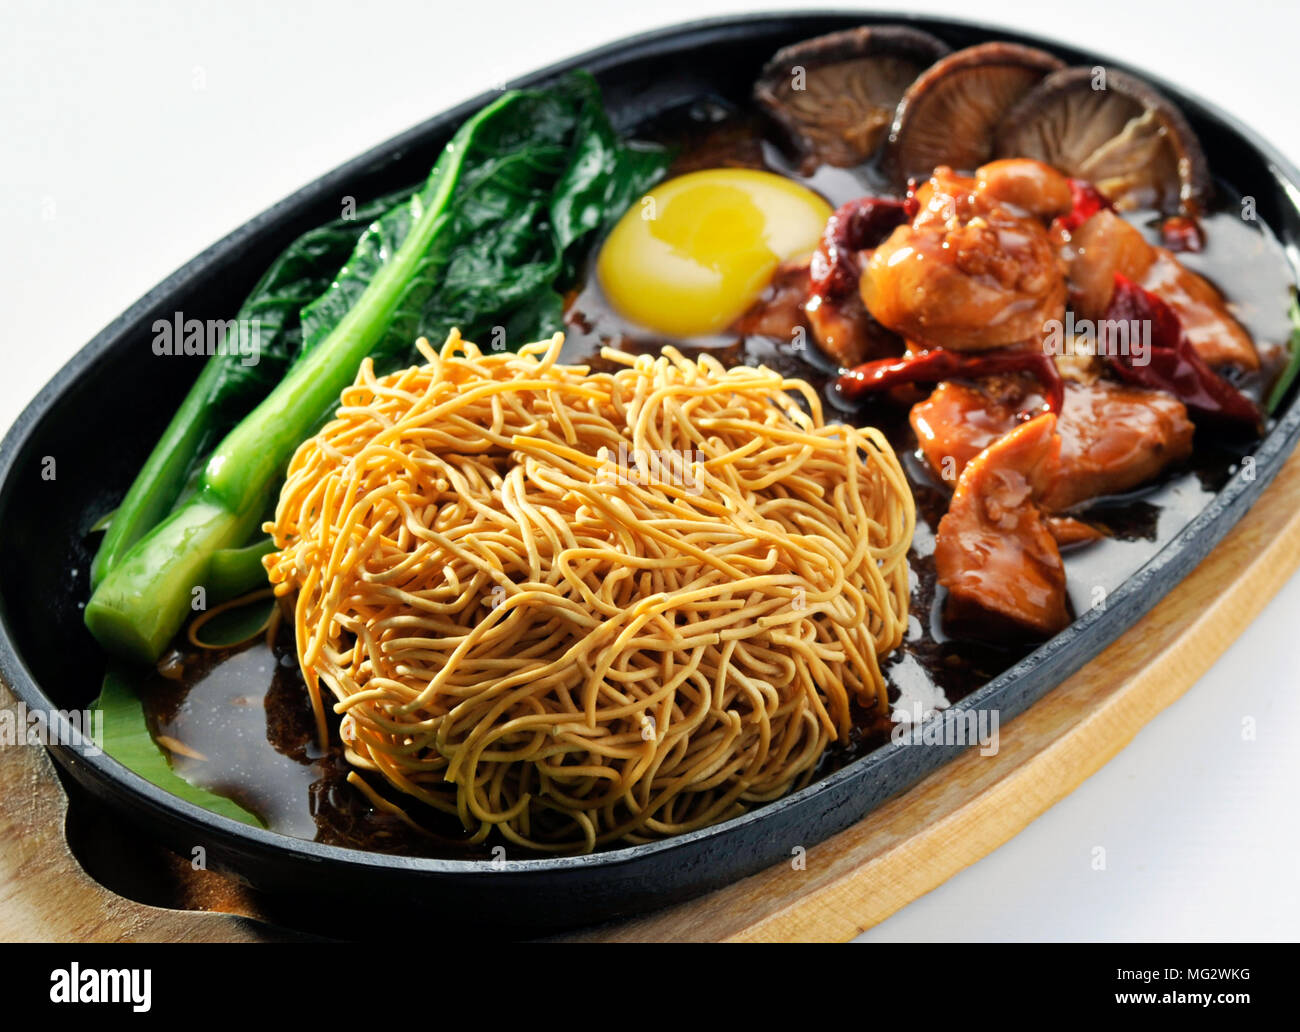 Chinese Food Sizzling Crispy Noodle Malaysian Food MG2WKG 